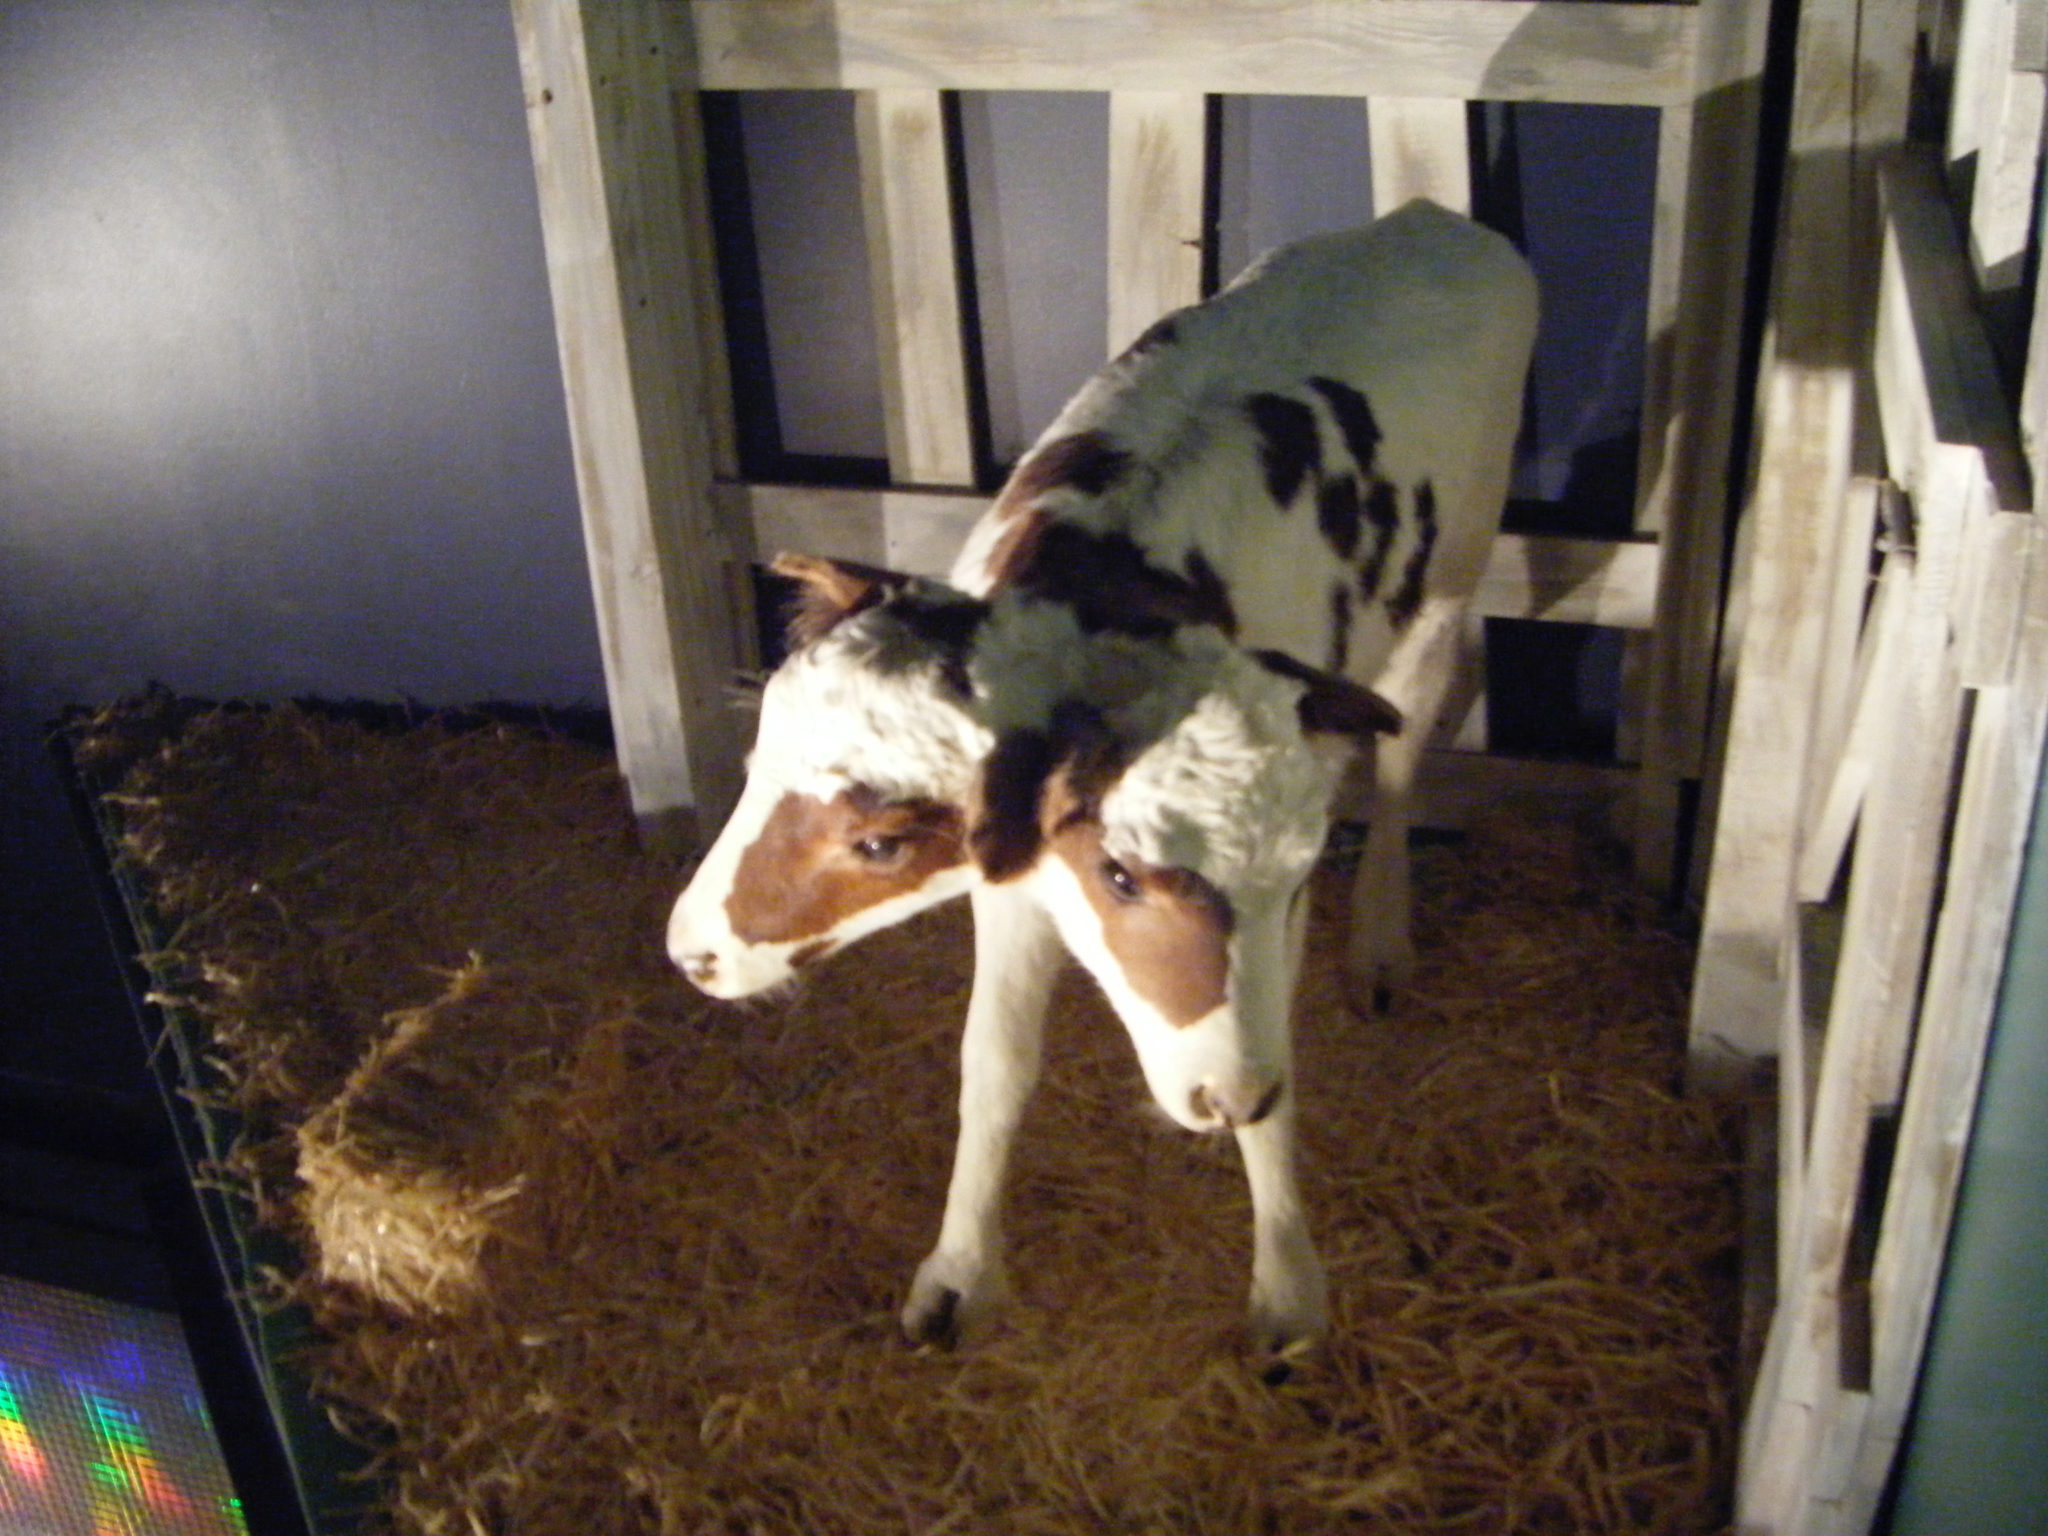 Two headed calf at Ripley's Believe it or Not in Branson MO